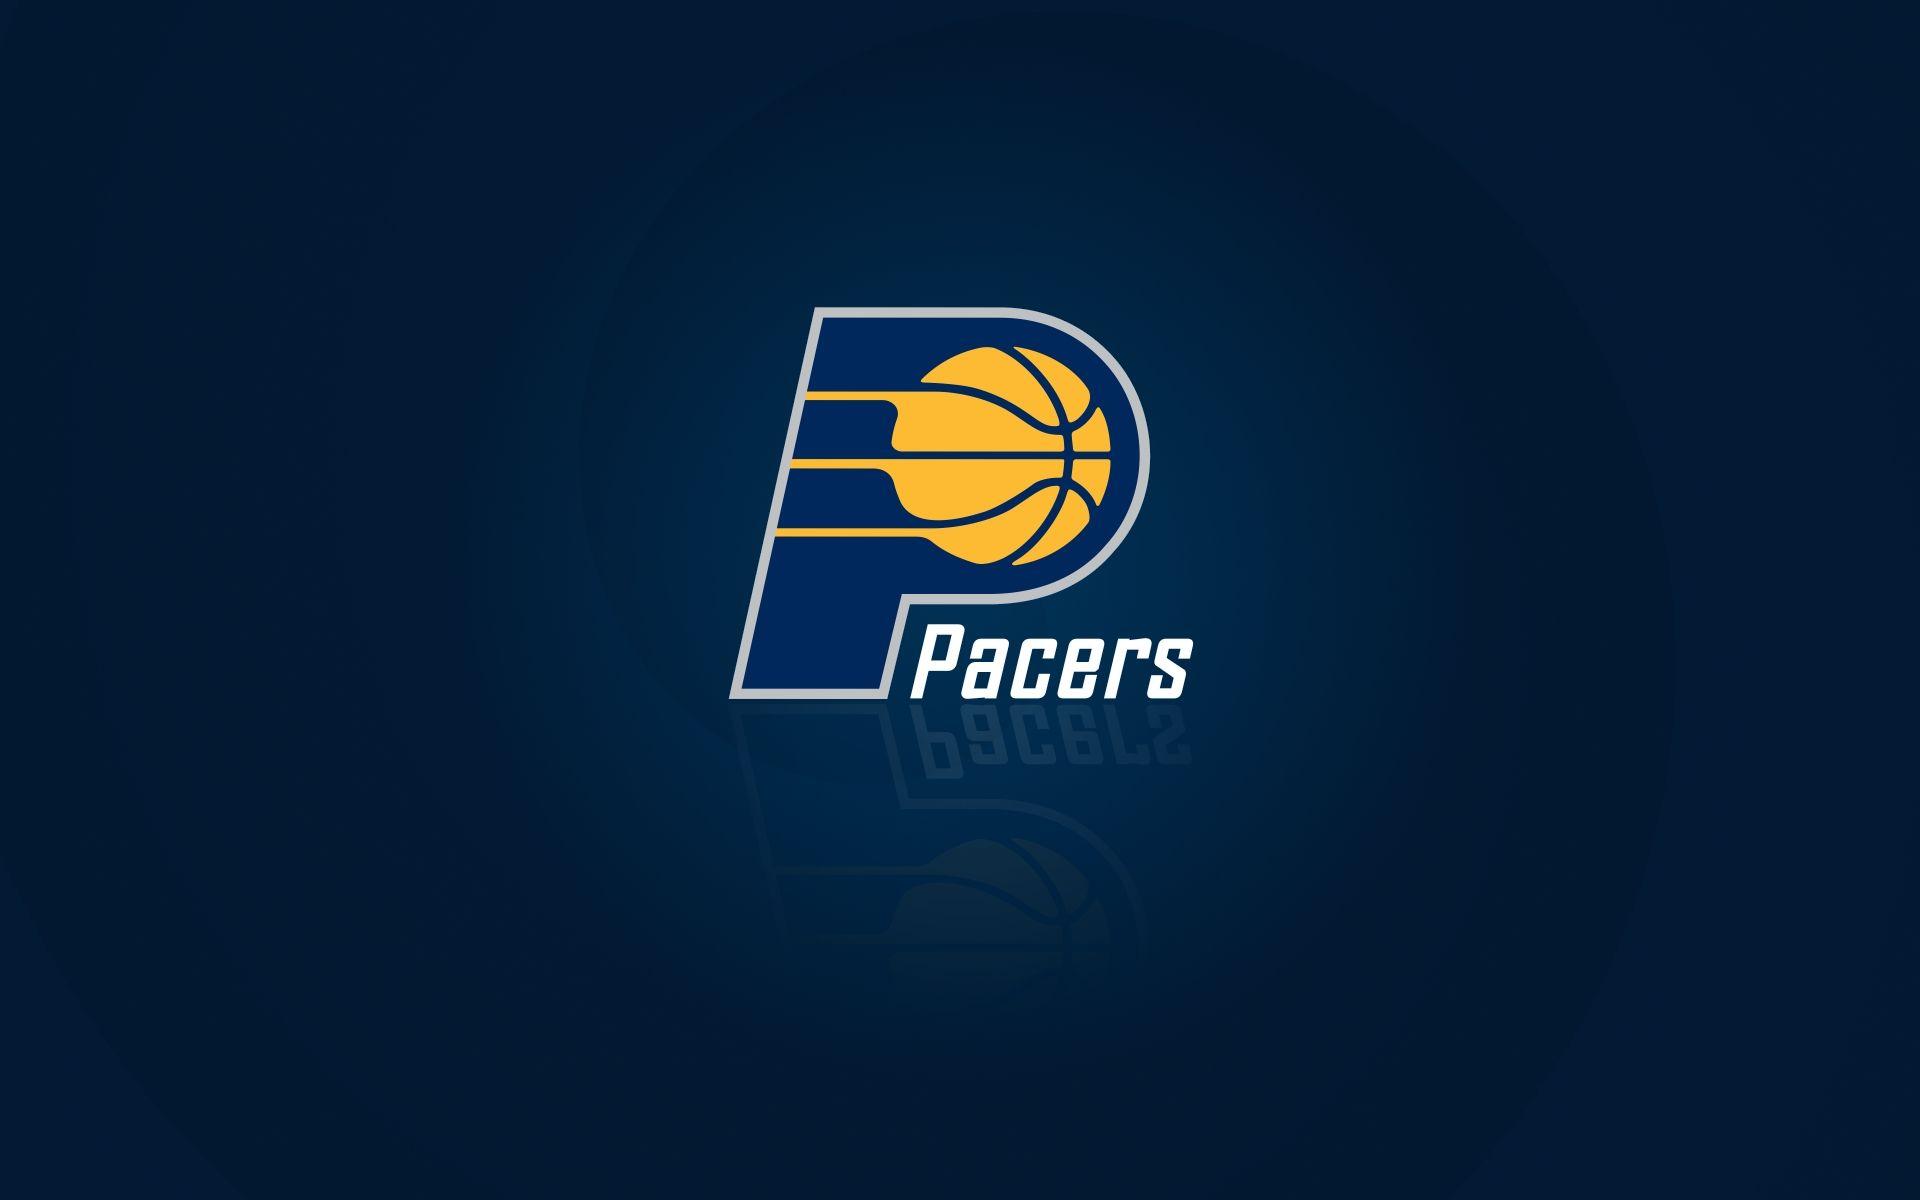 Pacers Logo - Indiana Pacers – Logos Download